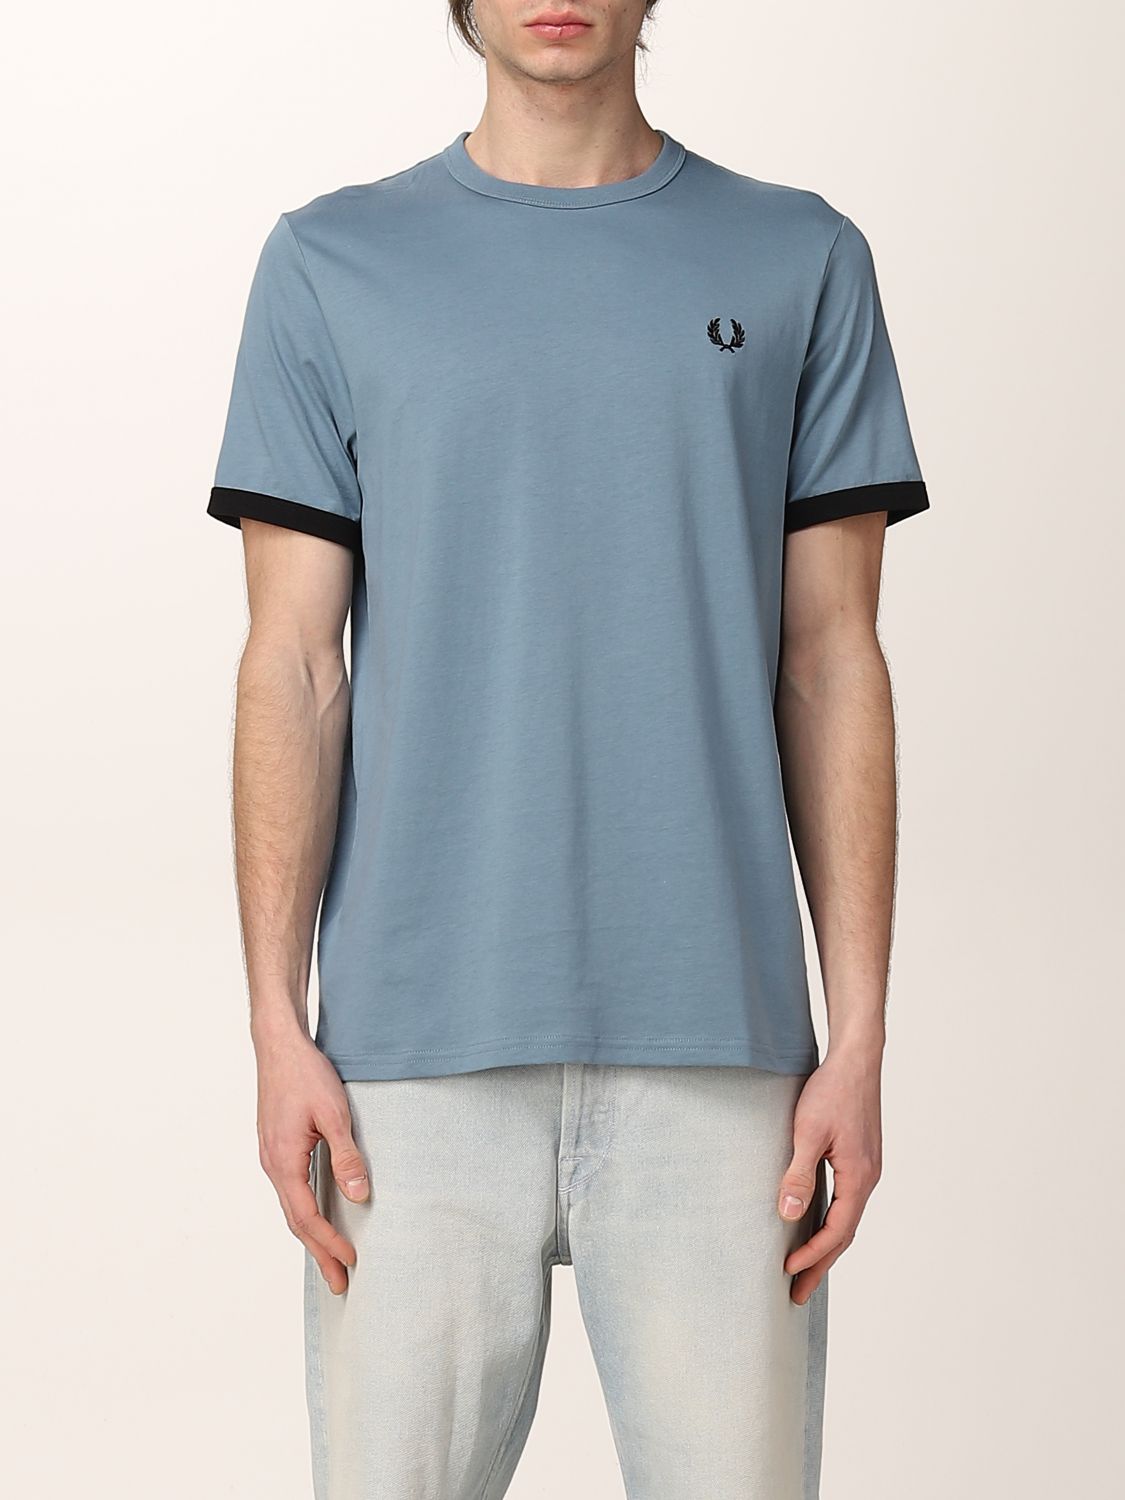 Tシャツ Fred Perry: Tシャツ Fred Perry メンズ スカイ 1